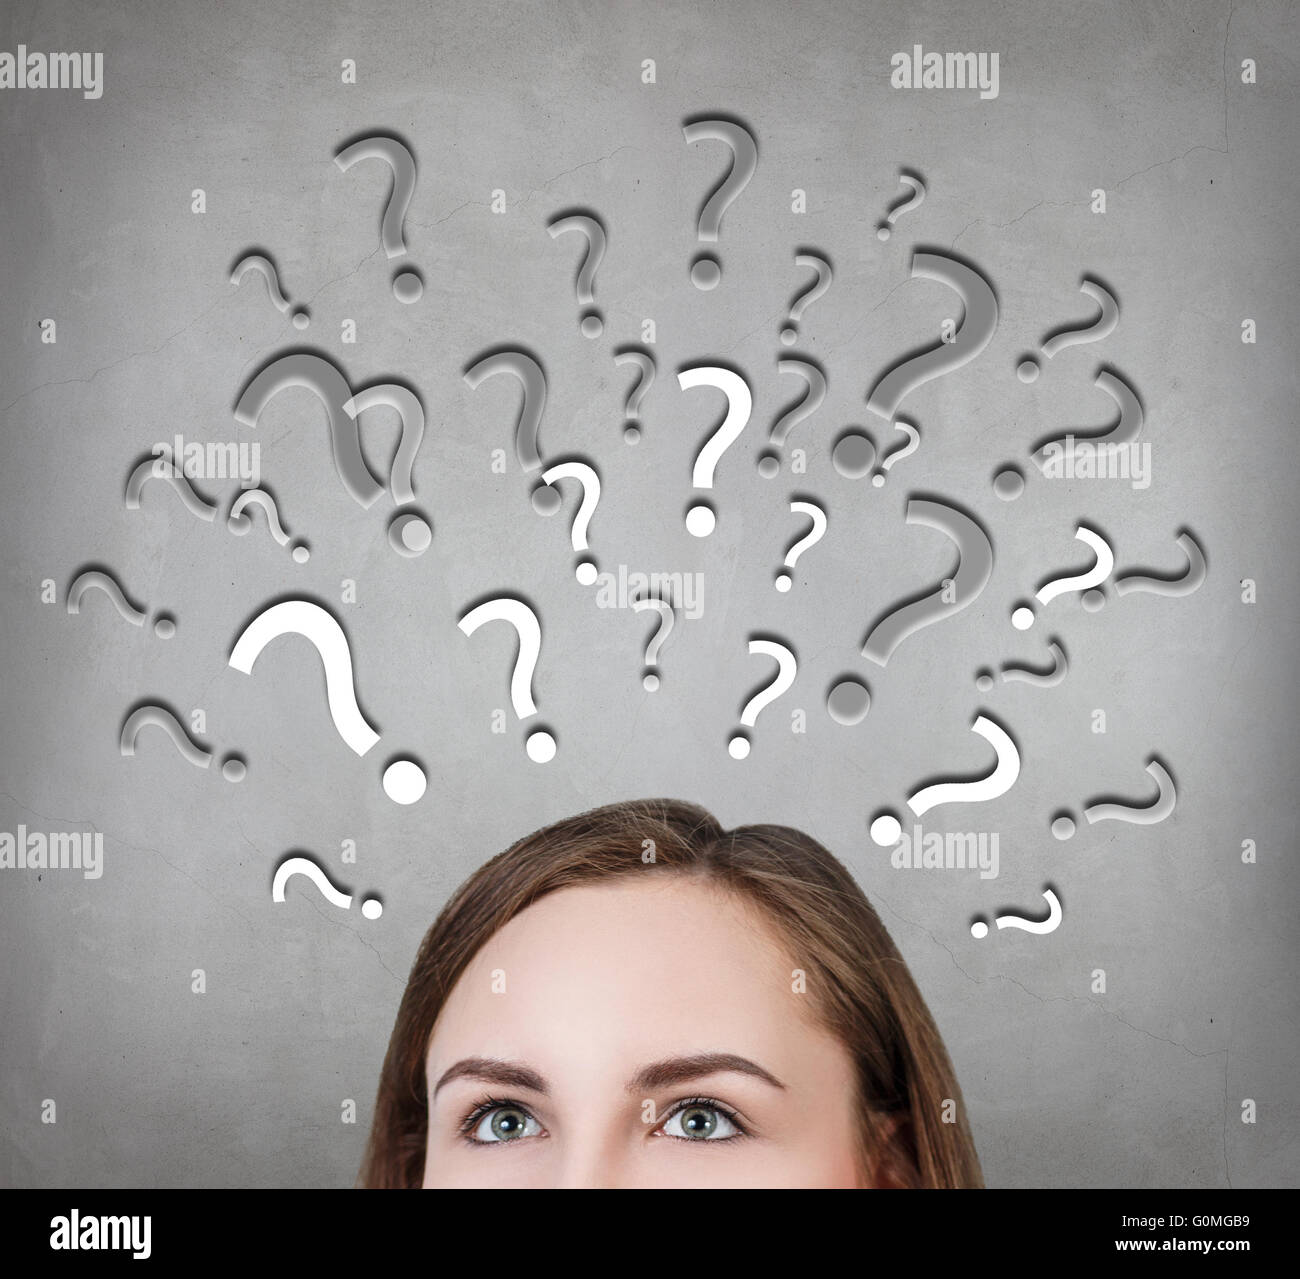 Woman has too many questions Stock Photo